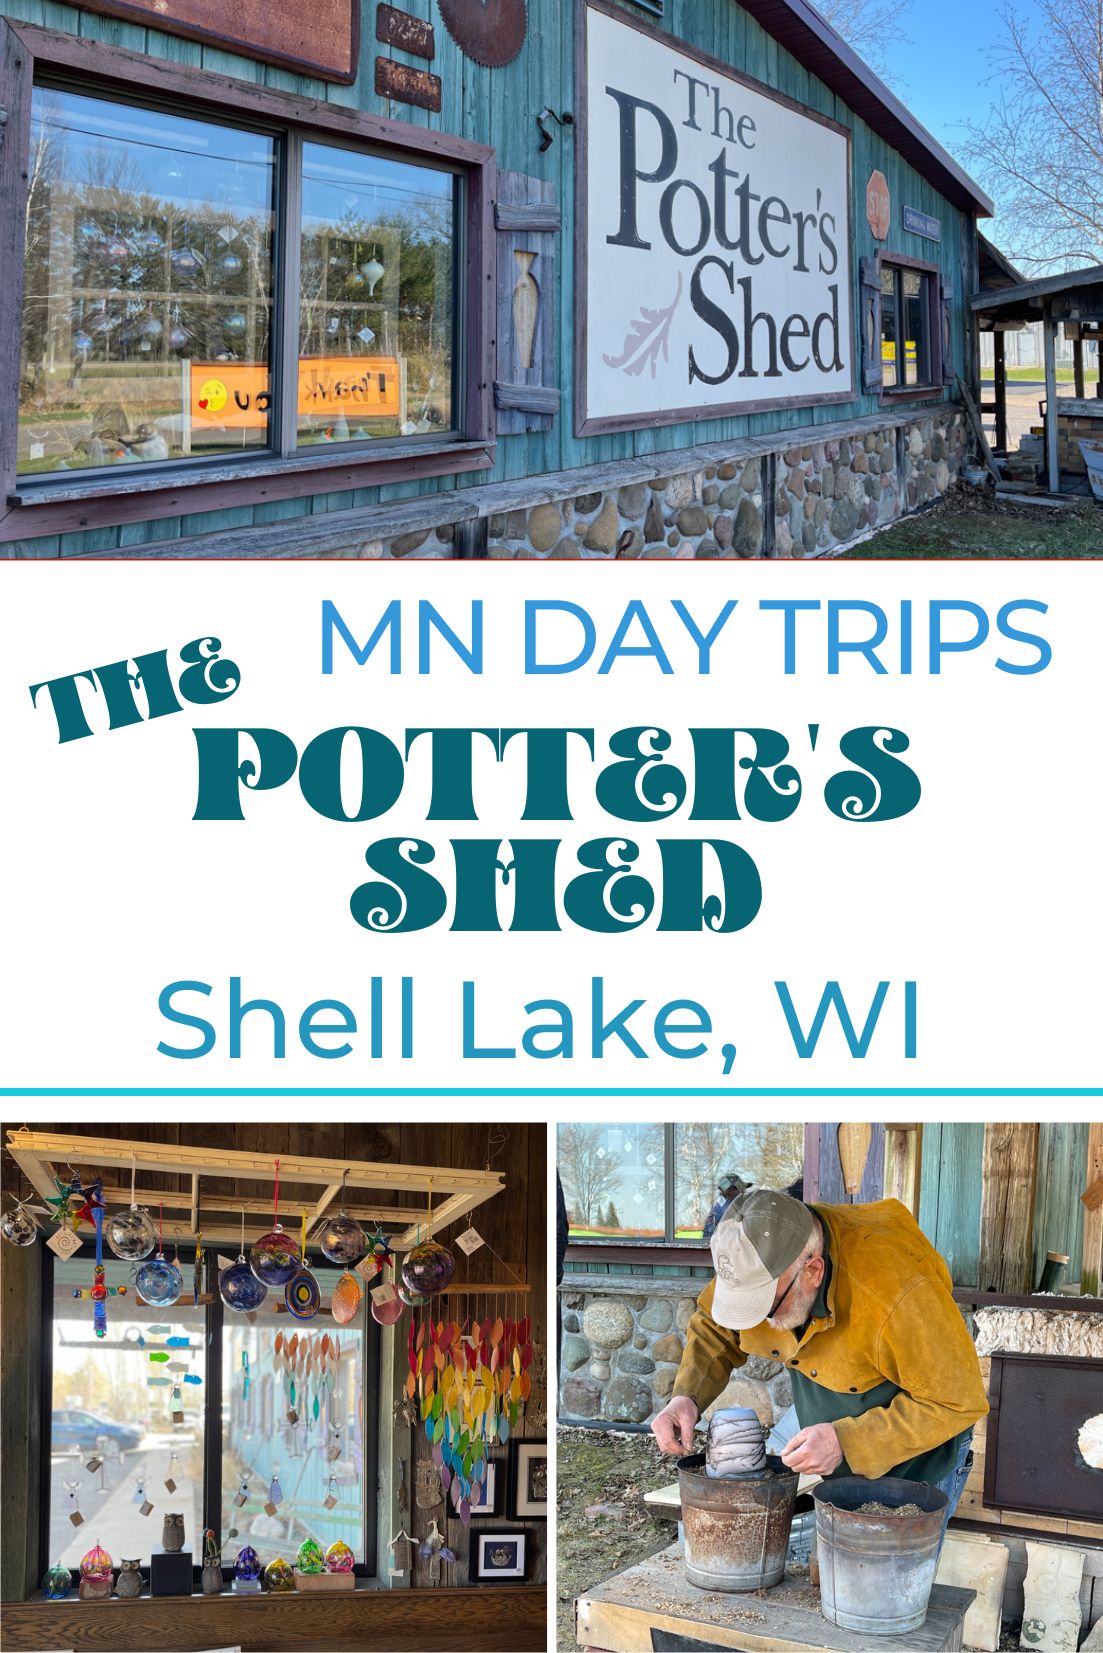 The Potter's Shed Shell Lake Wisconsin Day Trip